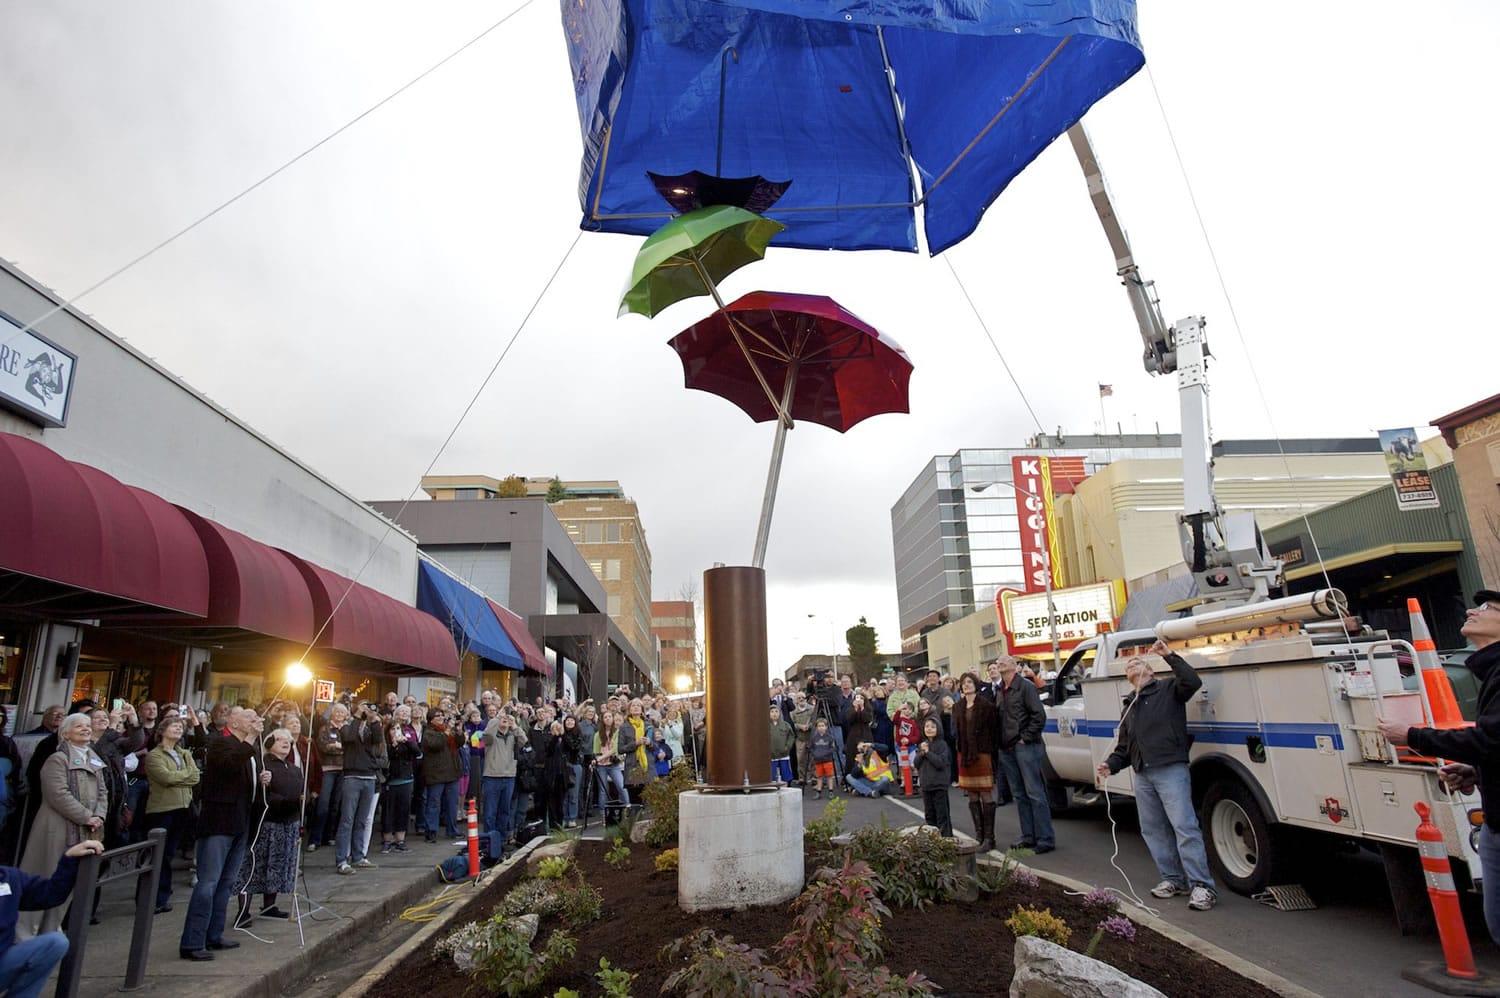 More than 200 people attended the unveiling of &quot;Flying Umbrellas&quot; on Friday evening in downtown Vancouver.